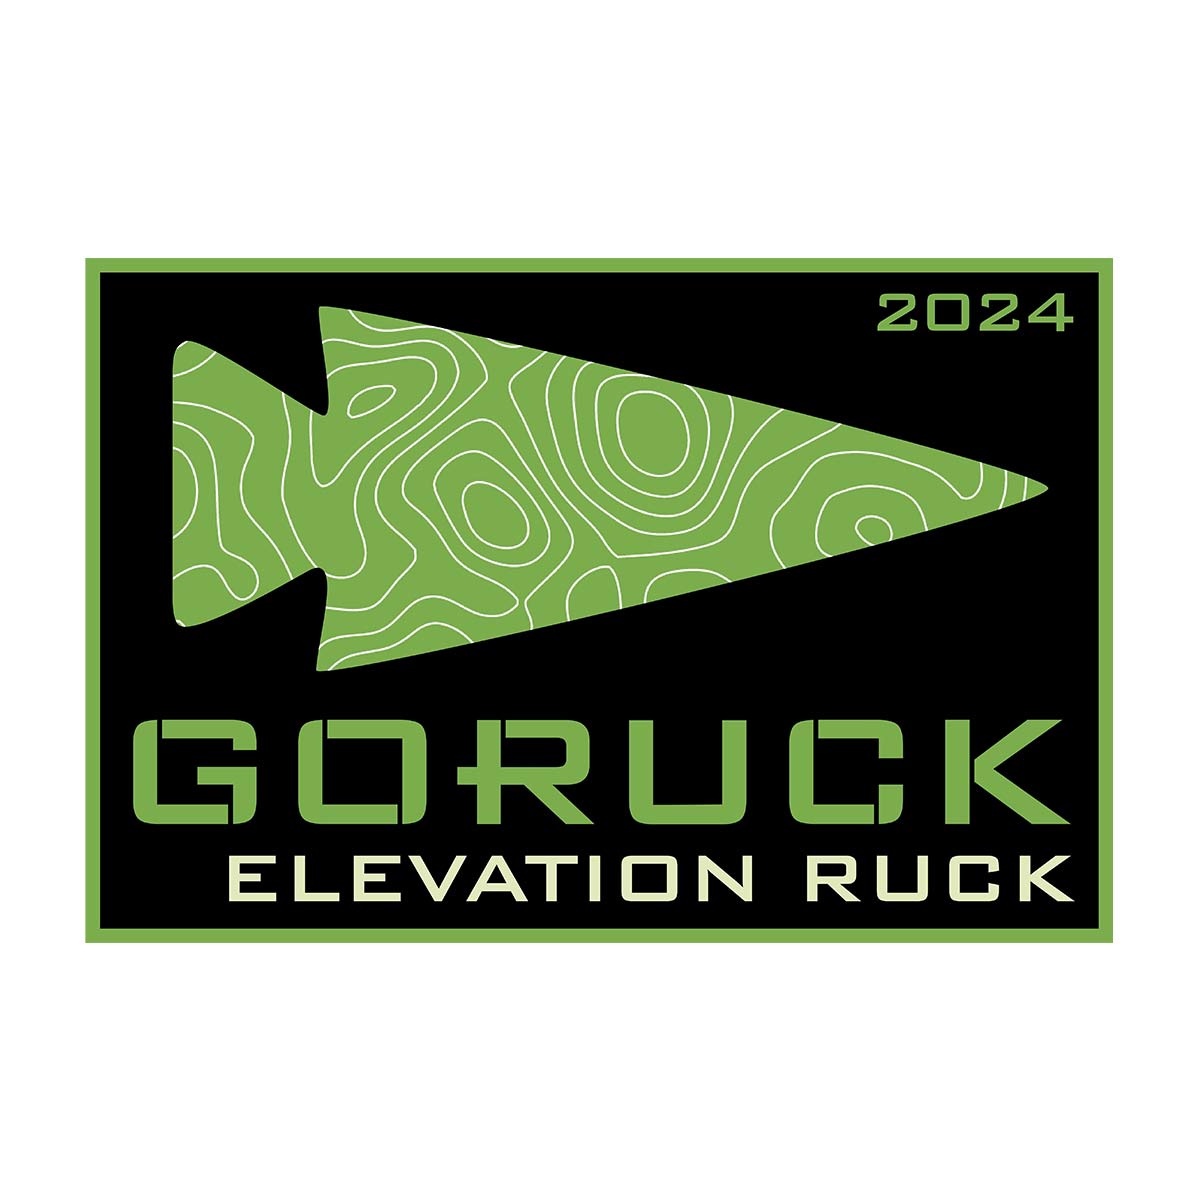 Patch  - Elevation Ruck 2024